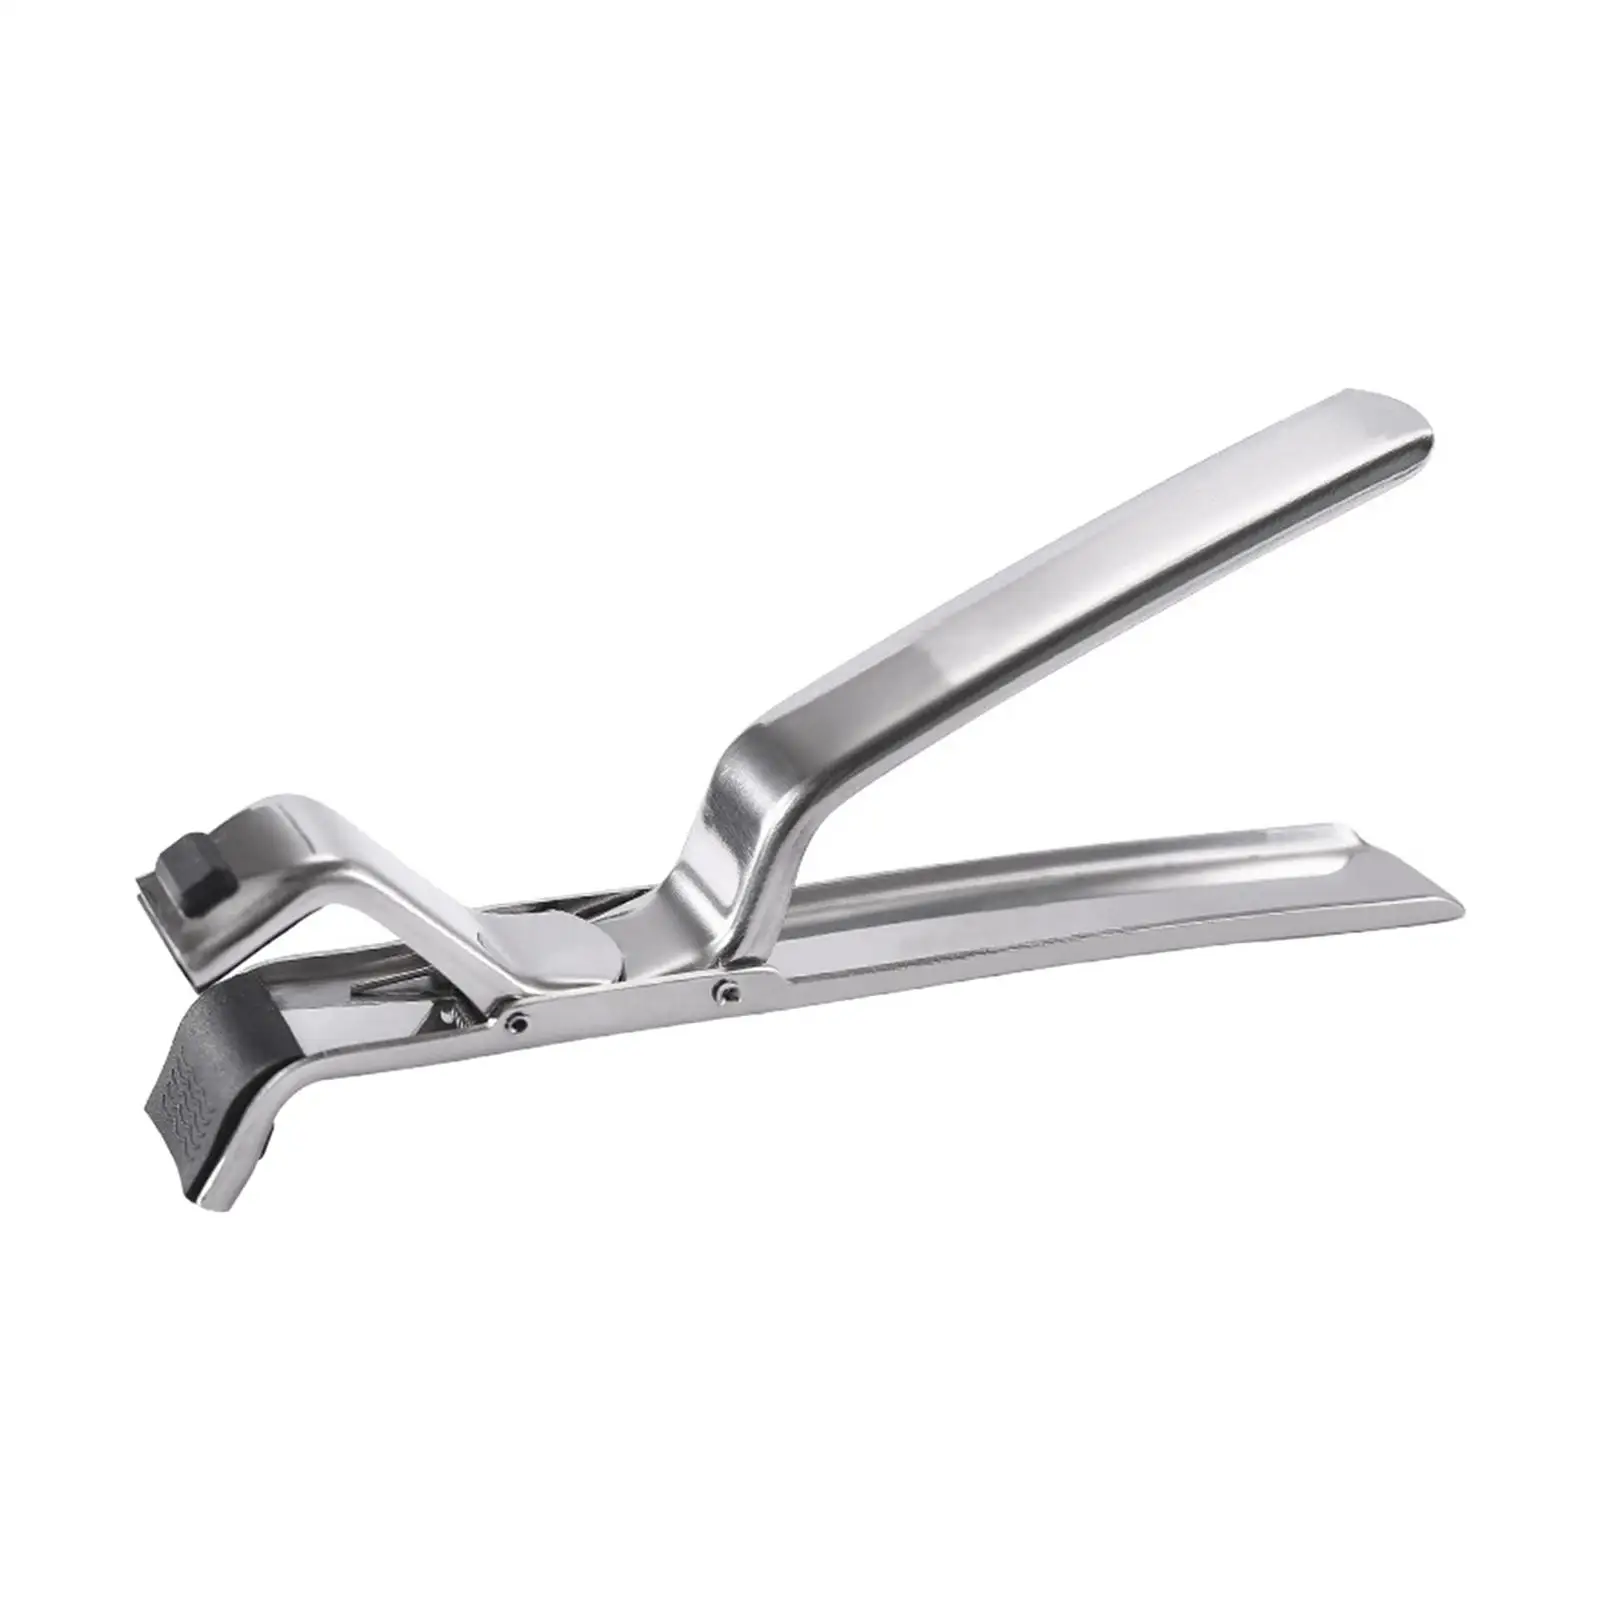 Stainless Steel Dish Clamp Dish Clip Bowl Spoon Utensil Holder for Kitchen Accessories Salad